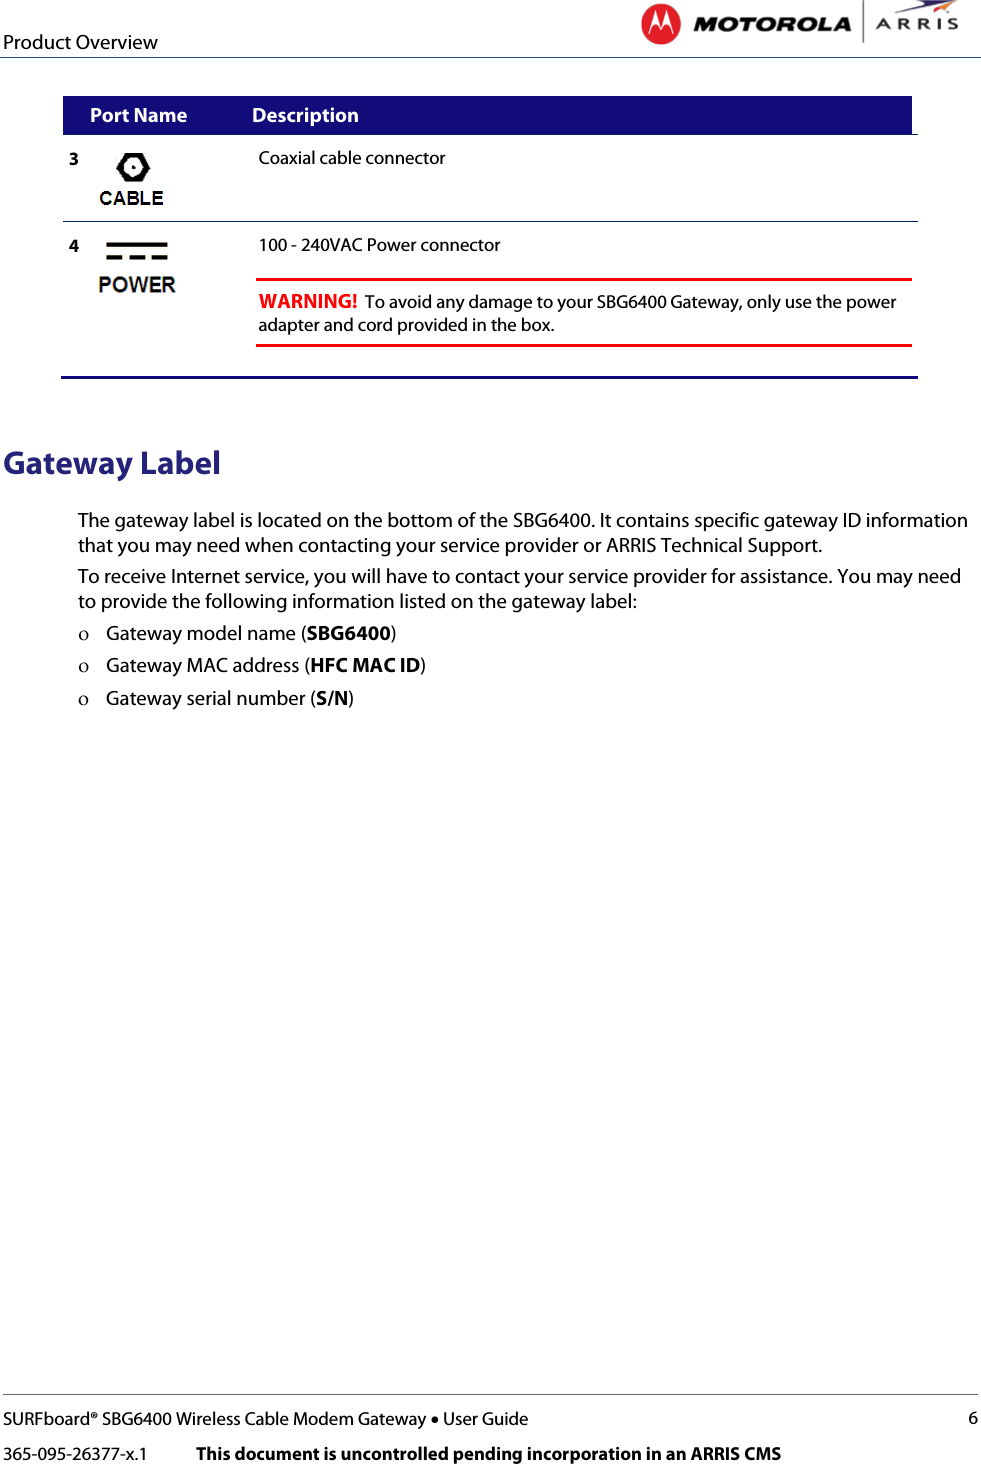 Product Overview   SURFboard® SBG6400 Wireless Cable Modem Gateway • User Guide 6 365-095-26377-x.1            This document is uncontrolled pending incorporation in an ARRIS CMS       Port Name Description 3  Coaxial cable connector 4  100 - 240VAC Power connector    WARNING!  To avoid any damage to your SBG6400 Gateway, only use the power adapter and cord provided in the box.    Gateway Label The gateway label is located on the bottom of the SBG6400. It contains specific gateway ID information that you may need when contacting your service provider or ARRIS Technical Support.  To receive Internet service, you will have to contact your service provider for assistance. You may need to provide the following information listed on the gateway label: ο Gateway model name (SBG6400) ο Gateway MAC address (HFC MAC ID) ο Gateway serial number (S/N)  